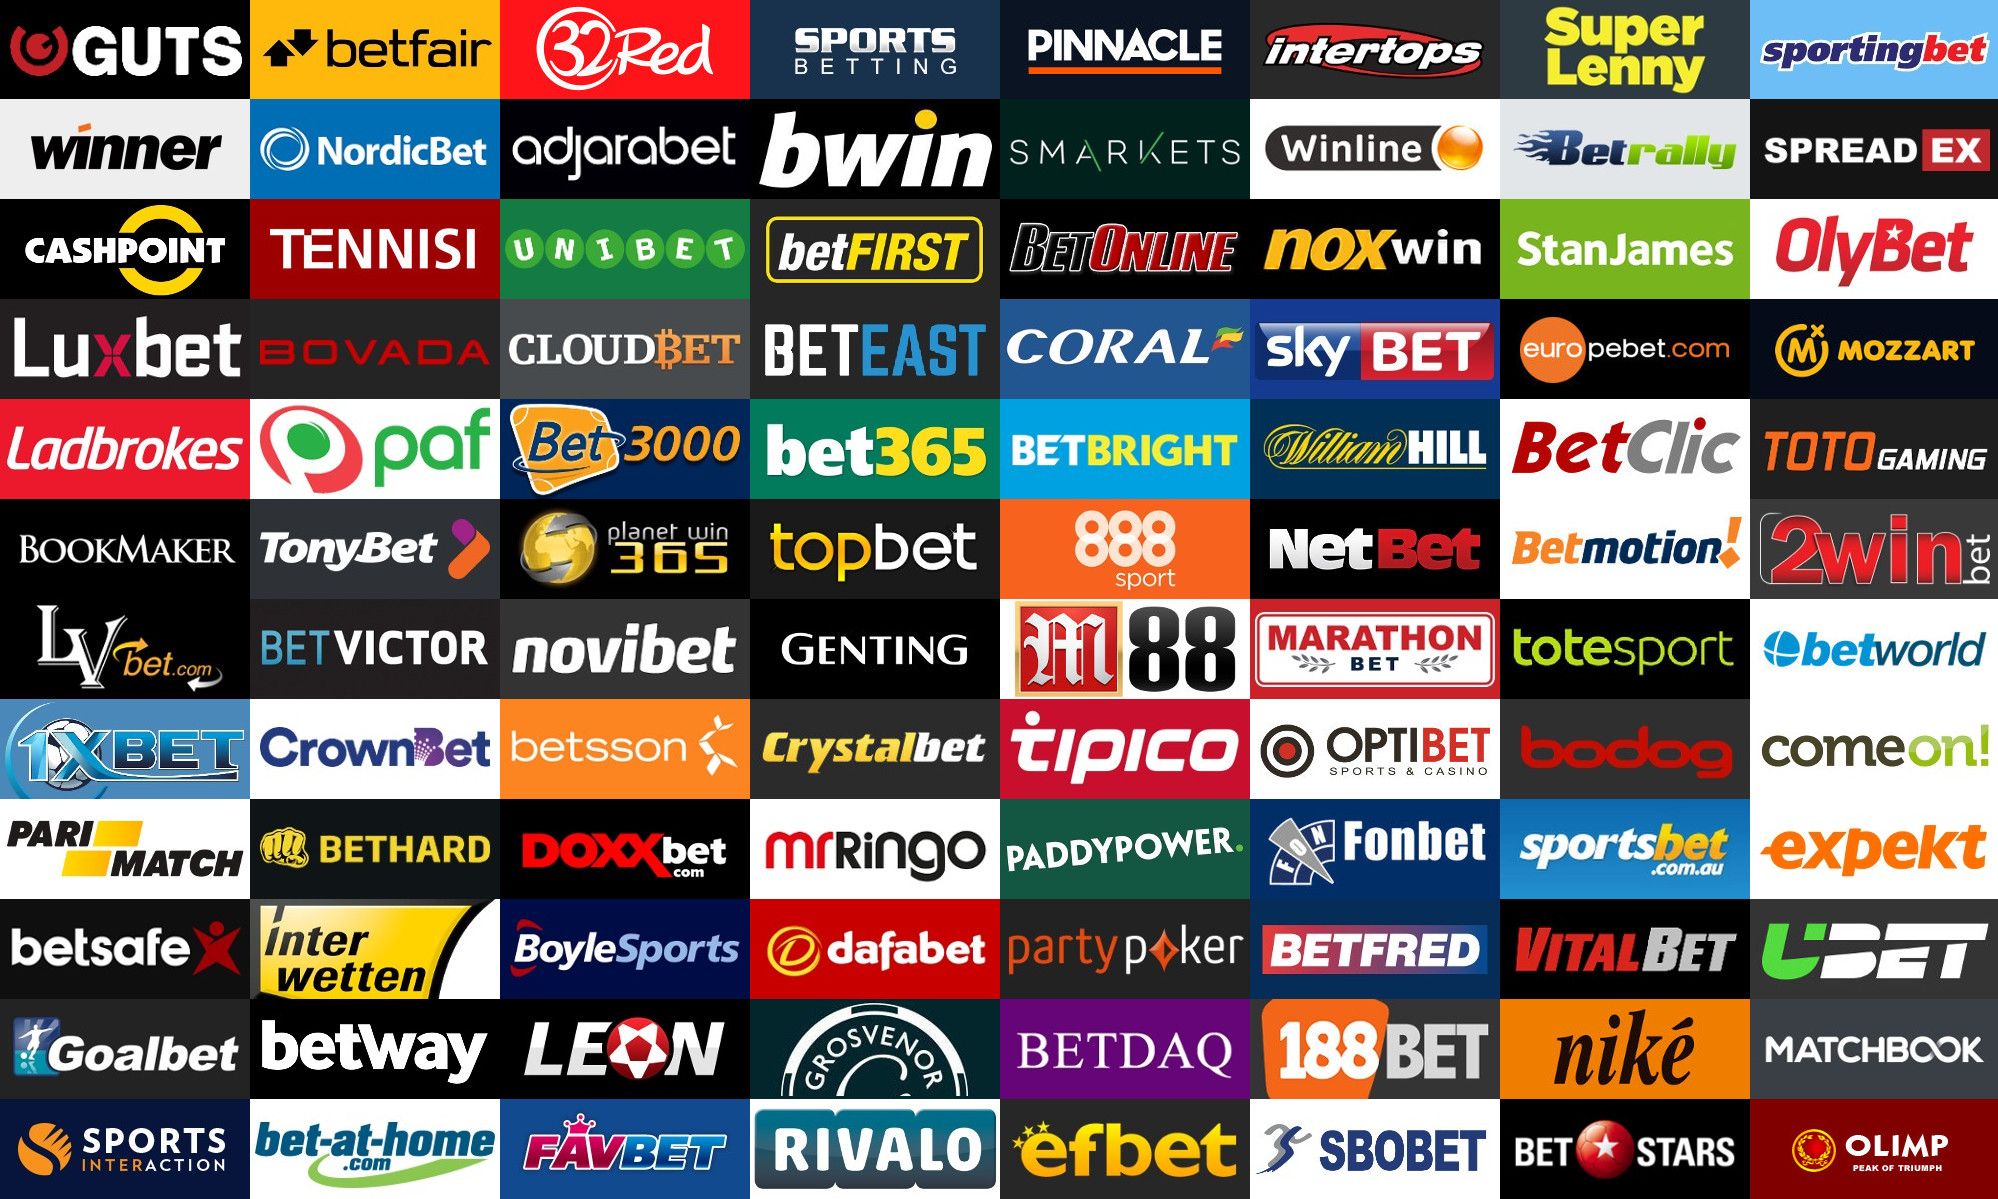 uk-bookmaker-offers